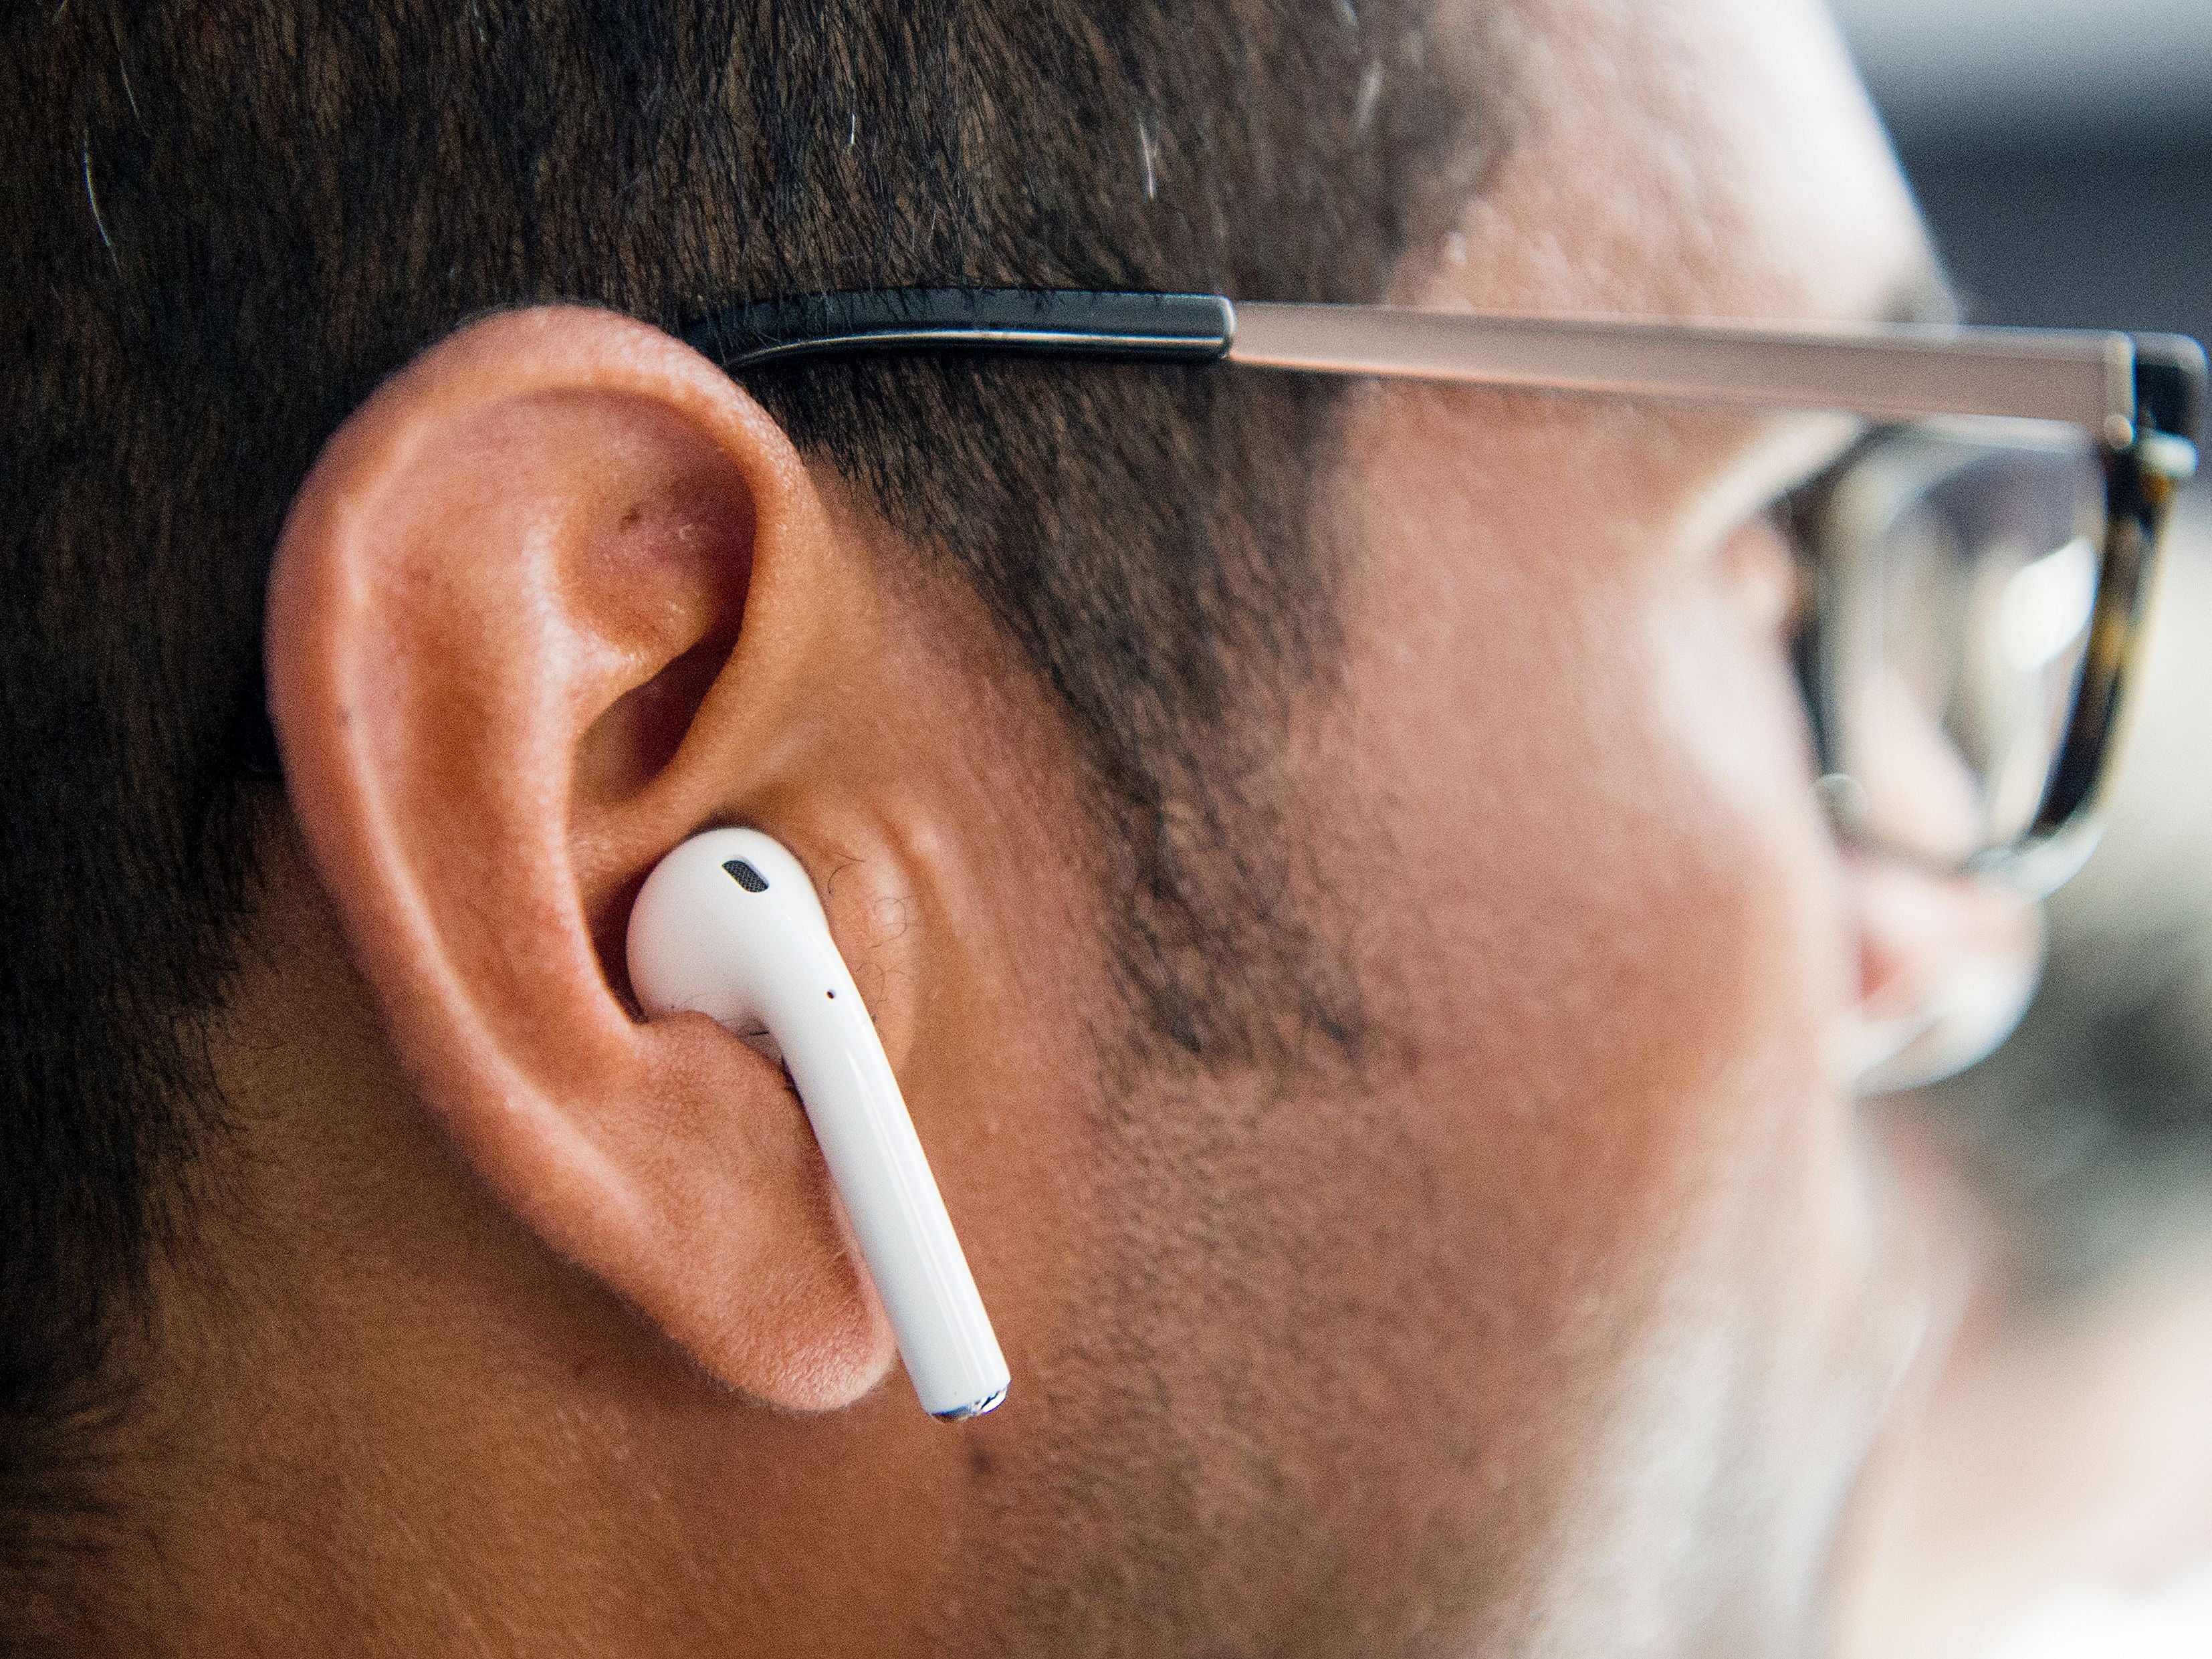 Apple wireless AirPods are tested during a media event at Bill Graham Civic Auditorium in San Francisco, California on September 07, 2016